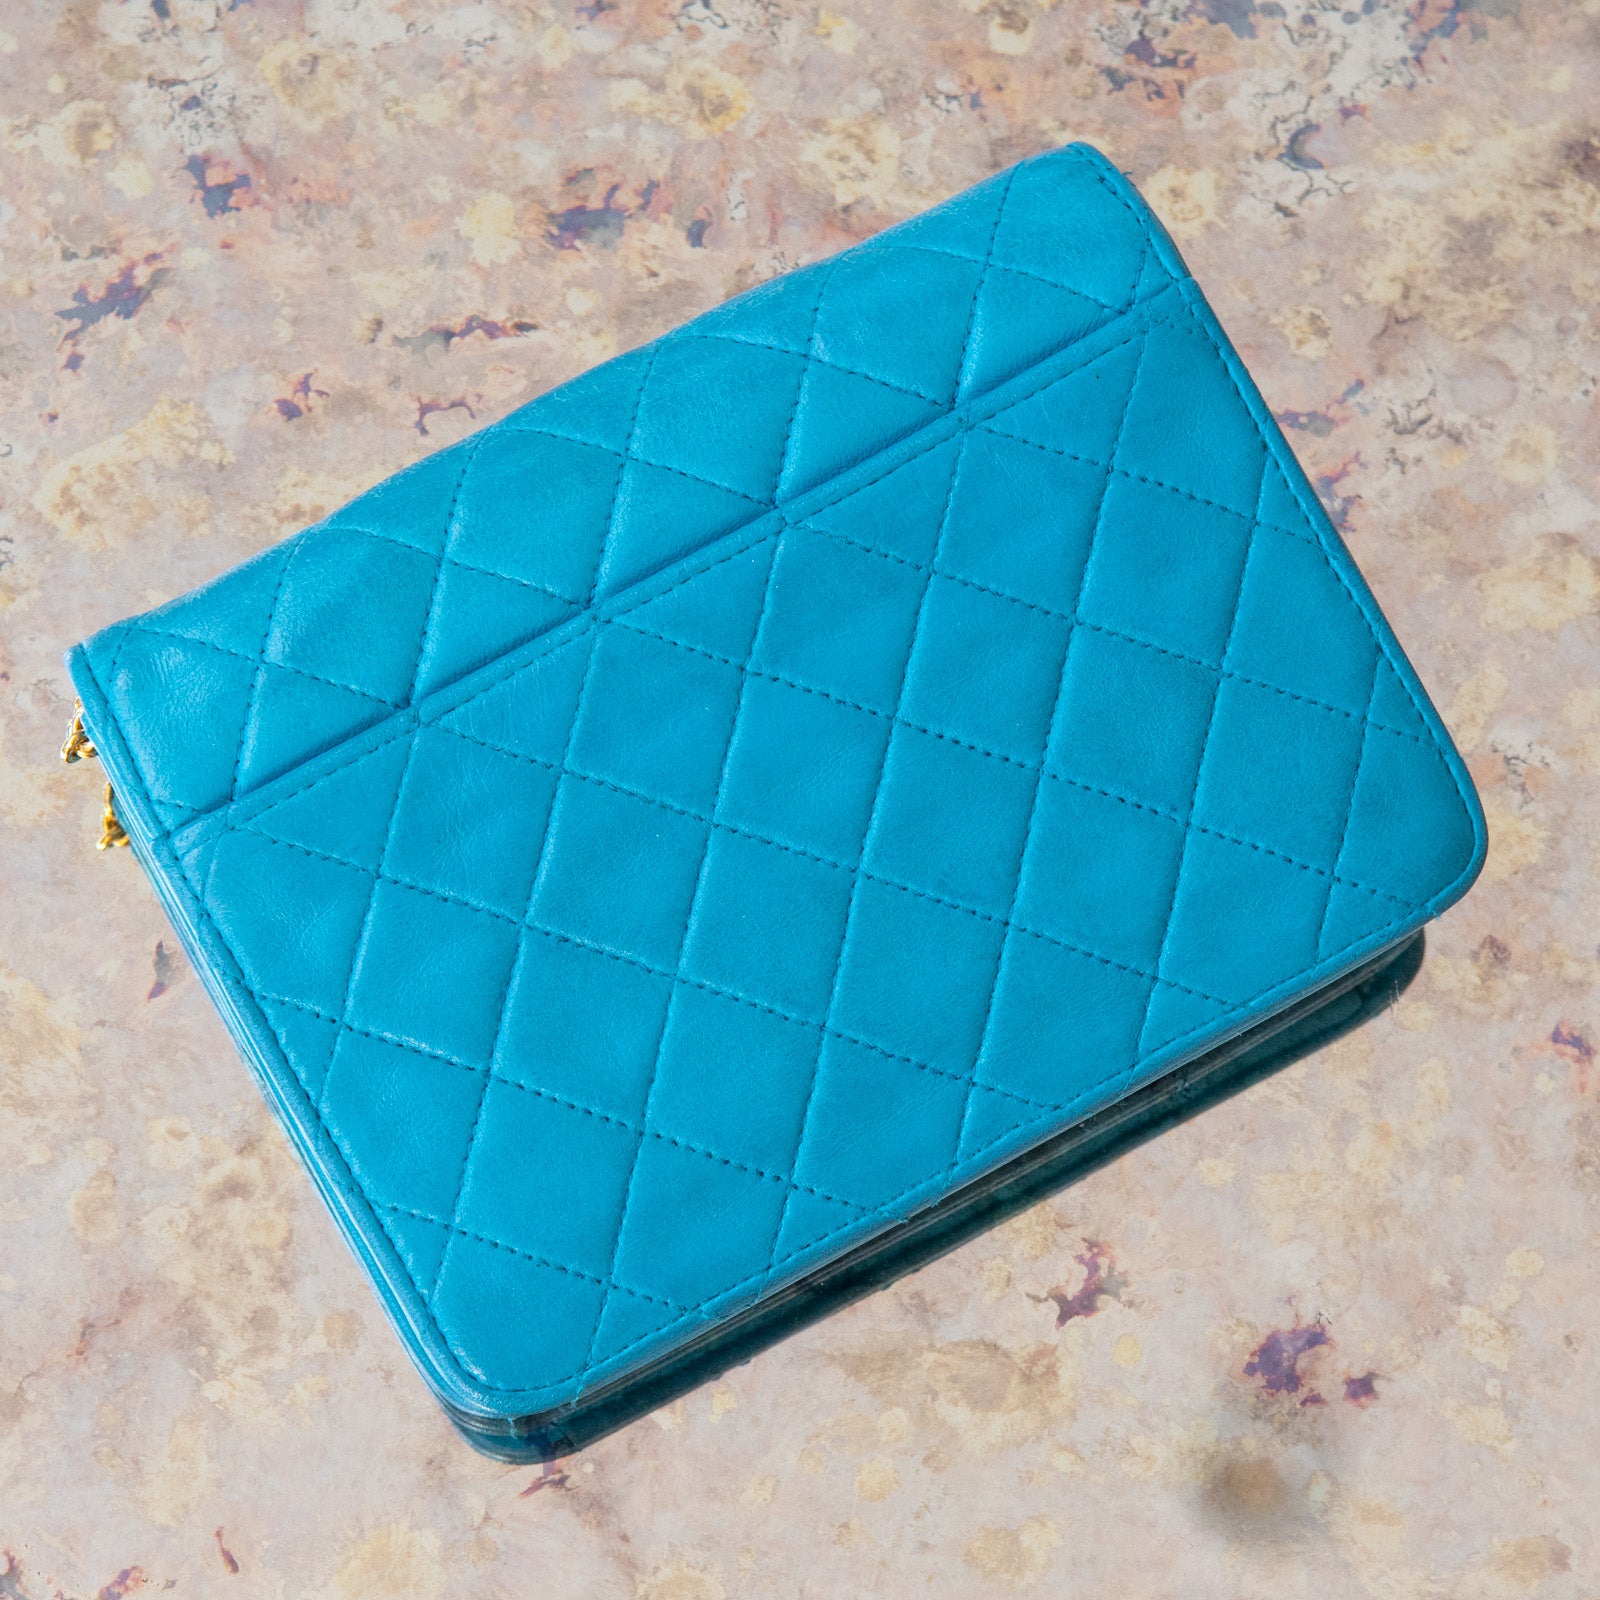 Chanel Turquoise Clutch On Chain Bag - Image 2 of 9